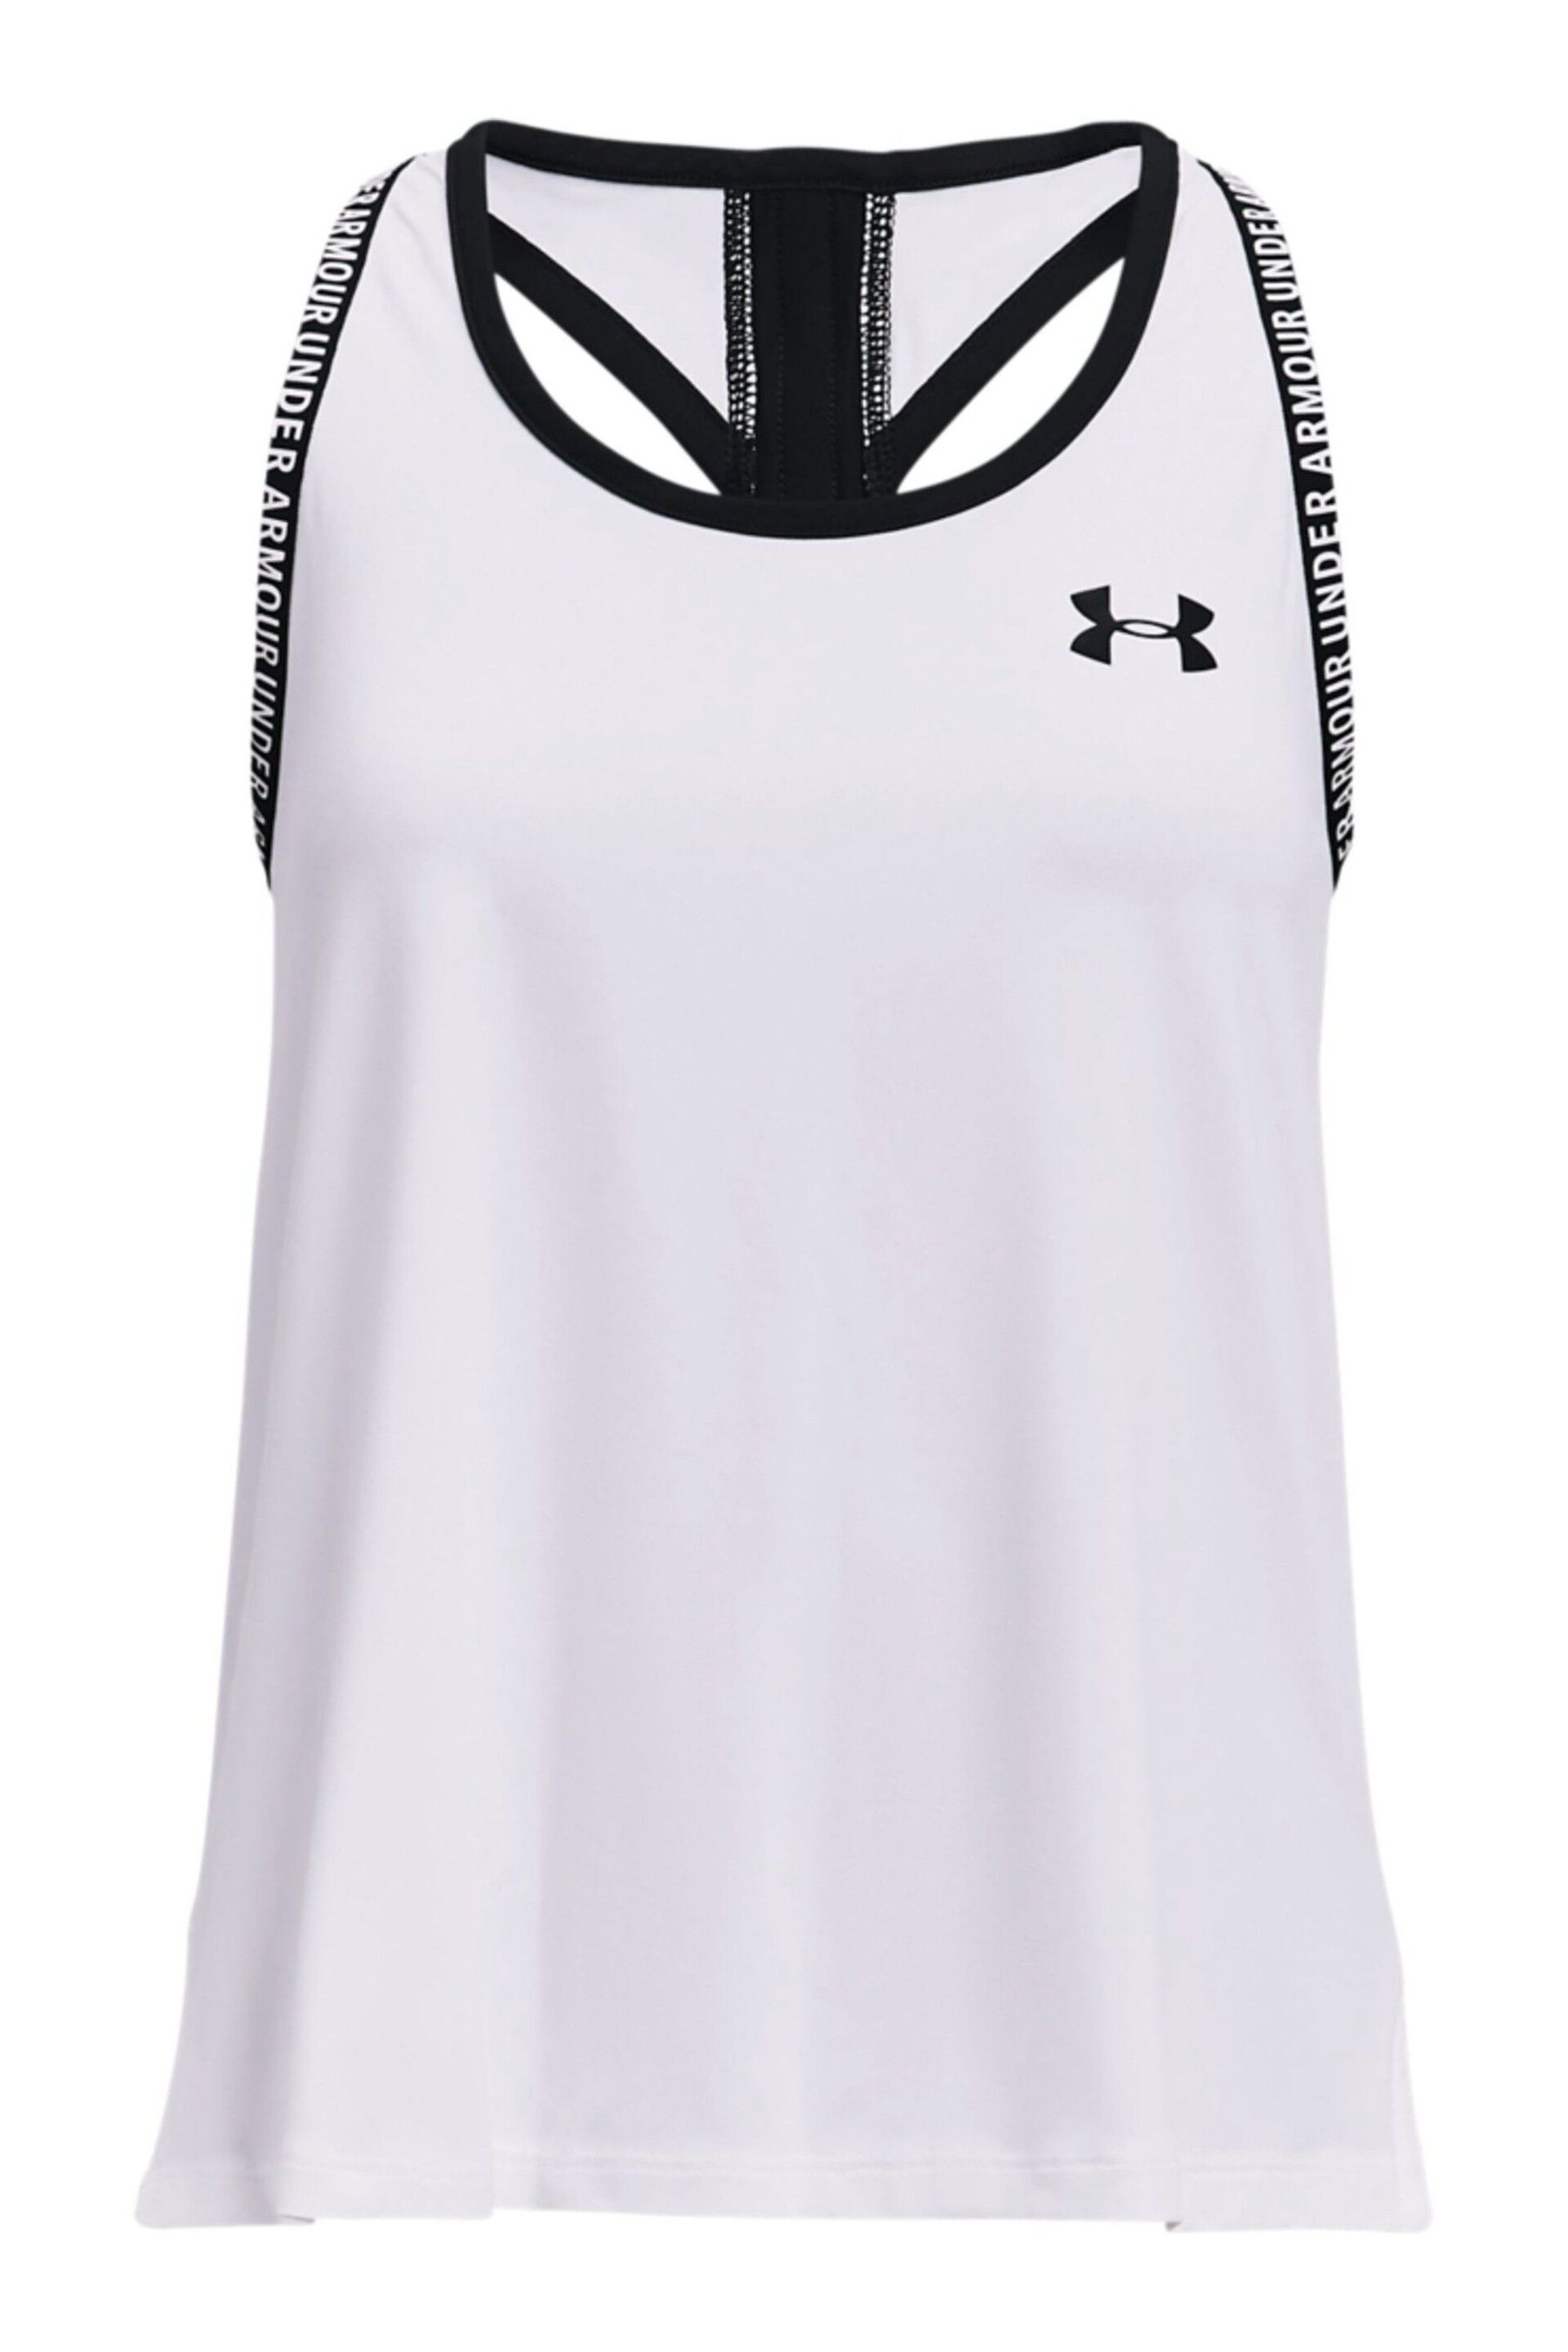 Under Armour White/Black Knockout Tank - Image 1 of 1